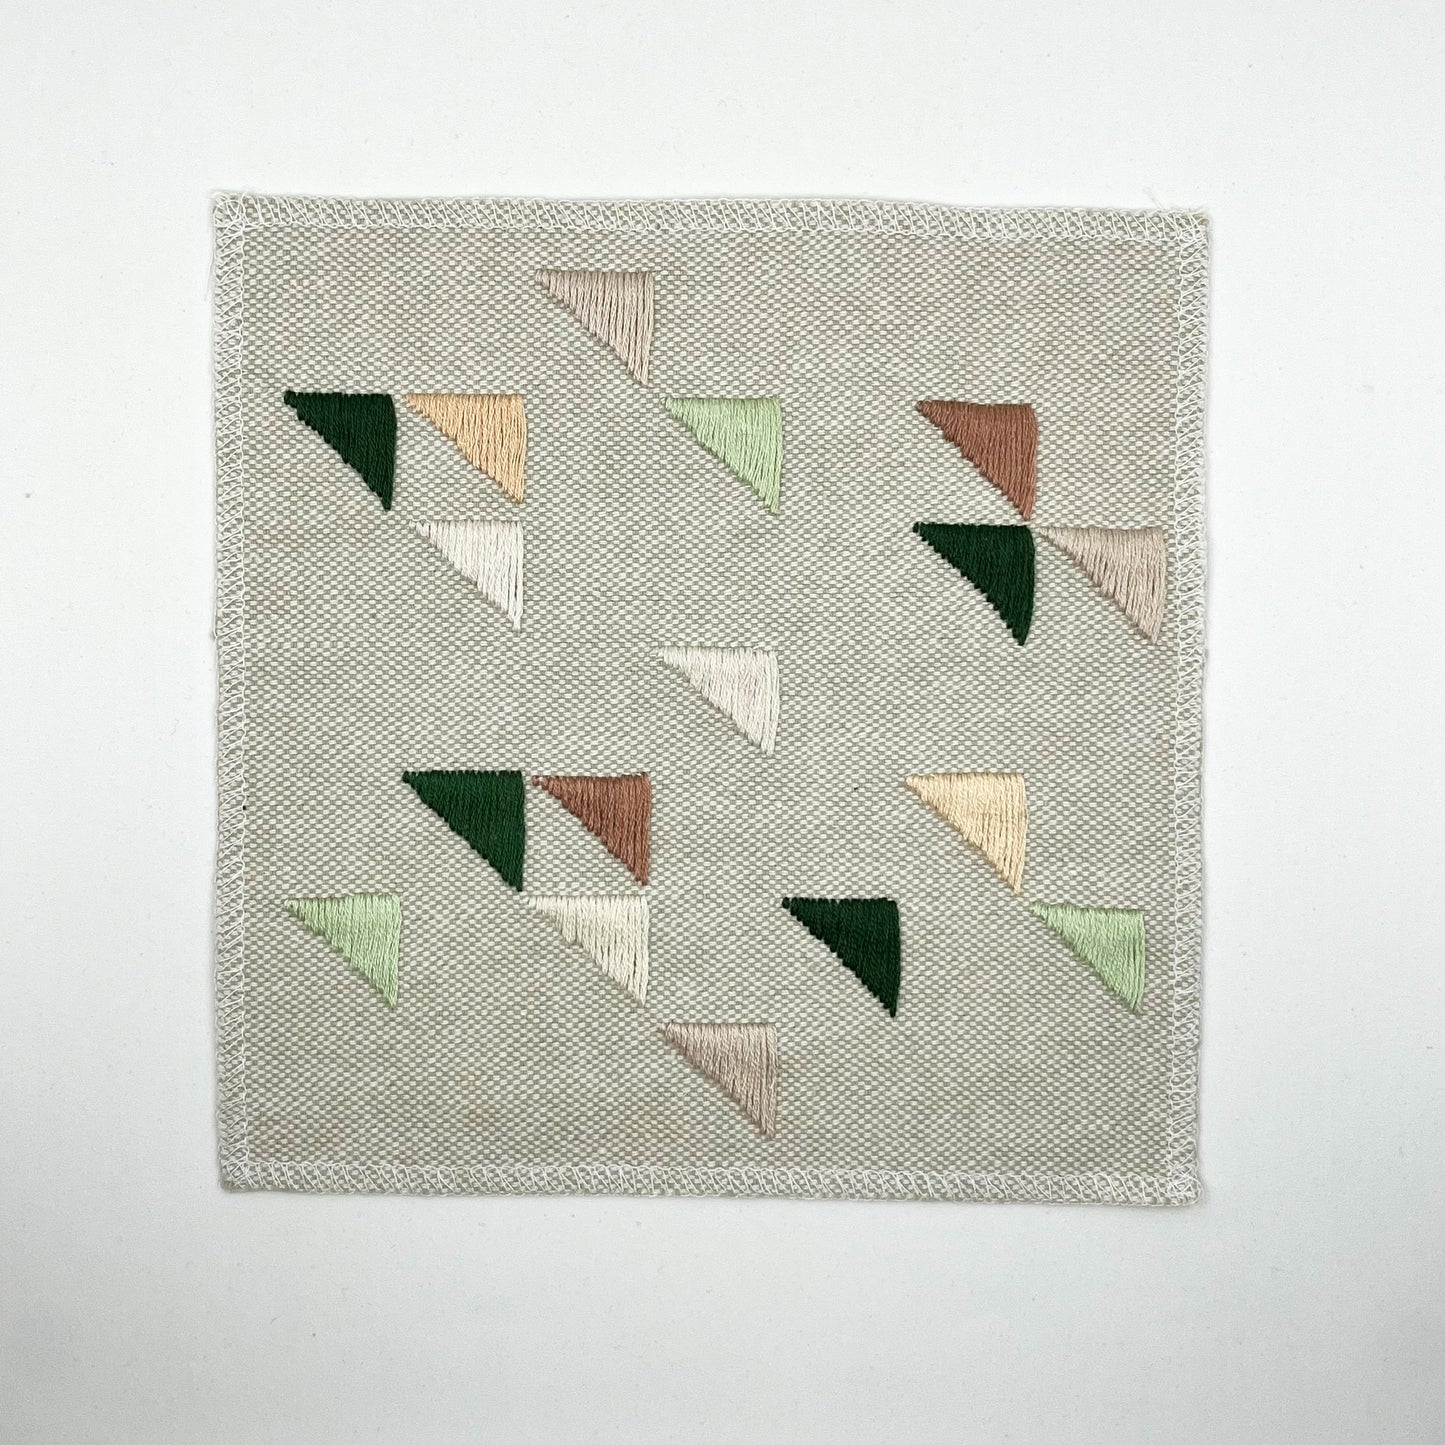 Large square natural colored patch embroidered with randomly placed triangles in peaches, mauves and greens, on a white background